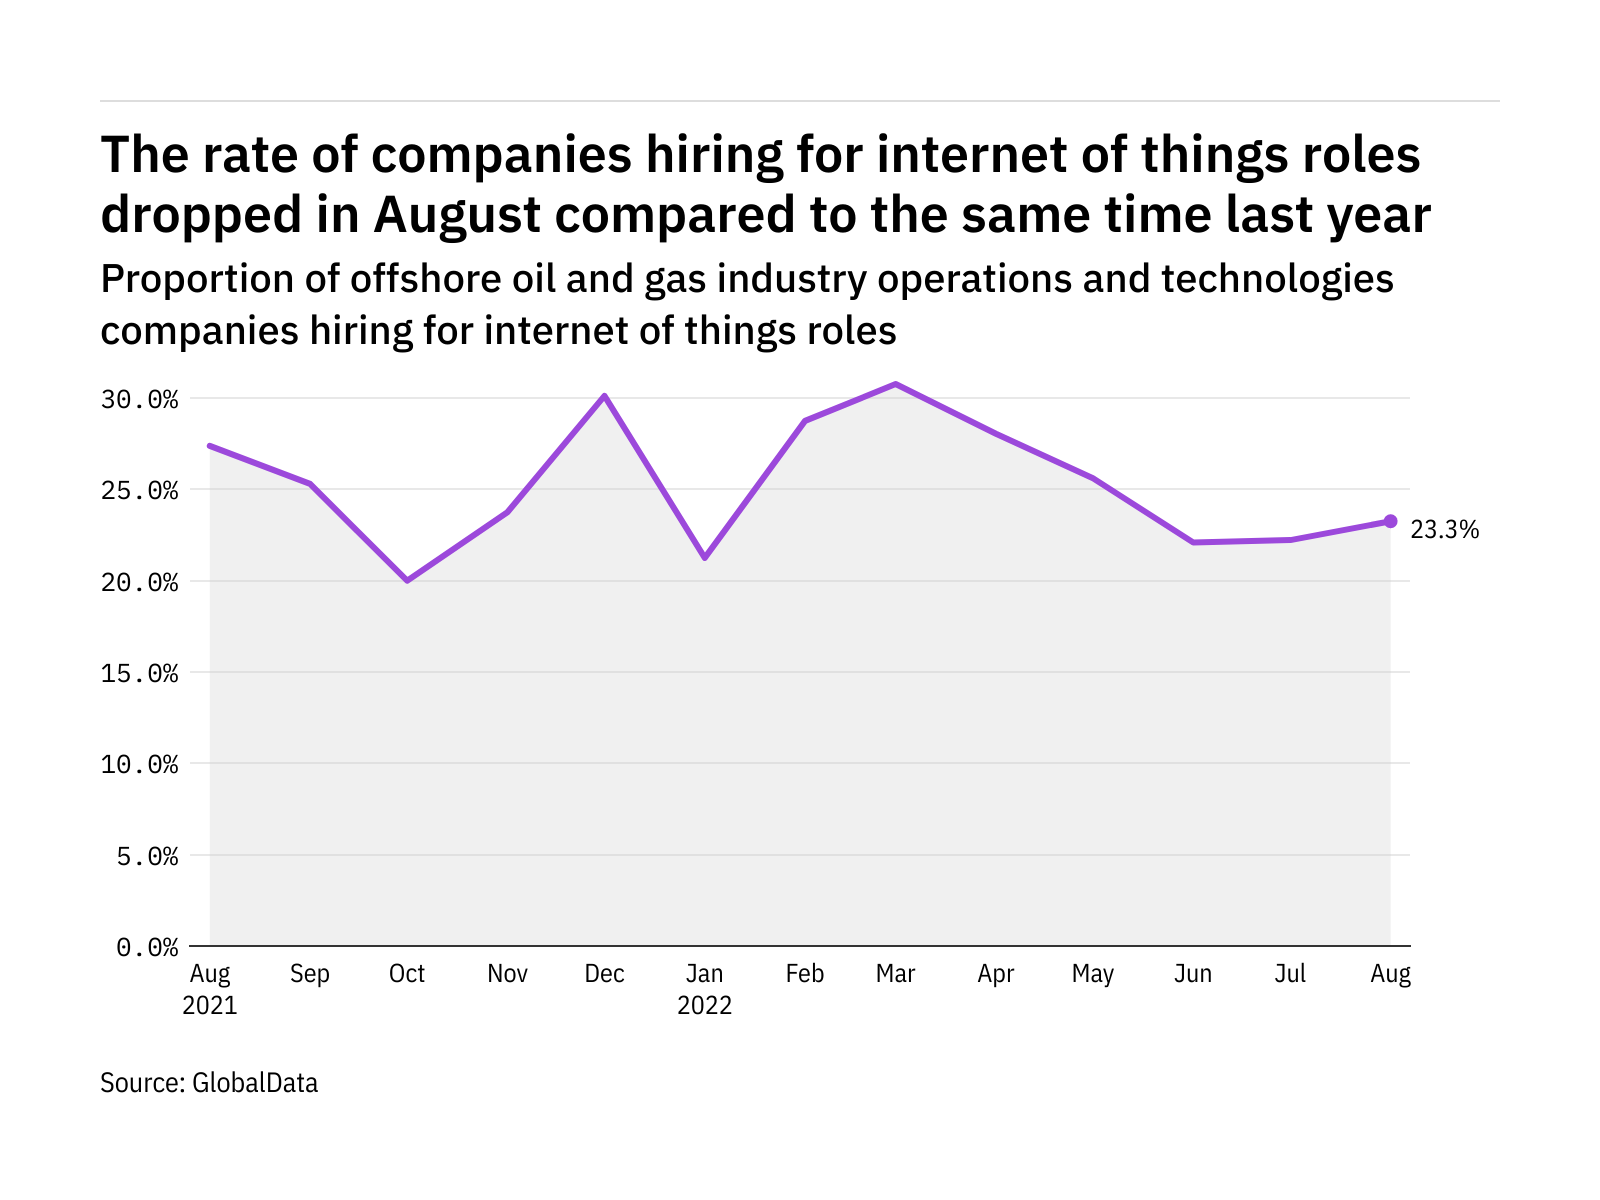 Internet of things hiring levels in the offshore industry dropped in August 2022